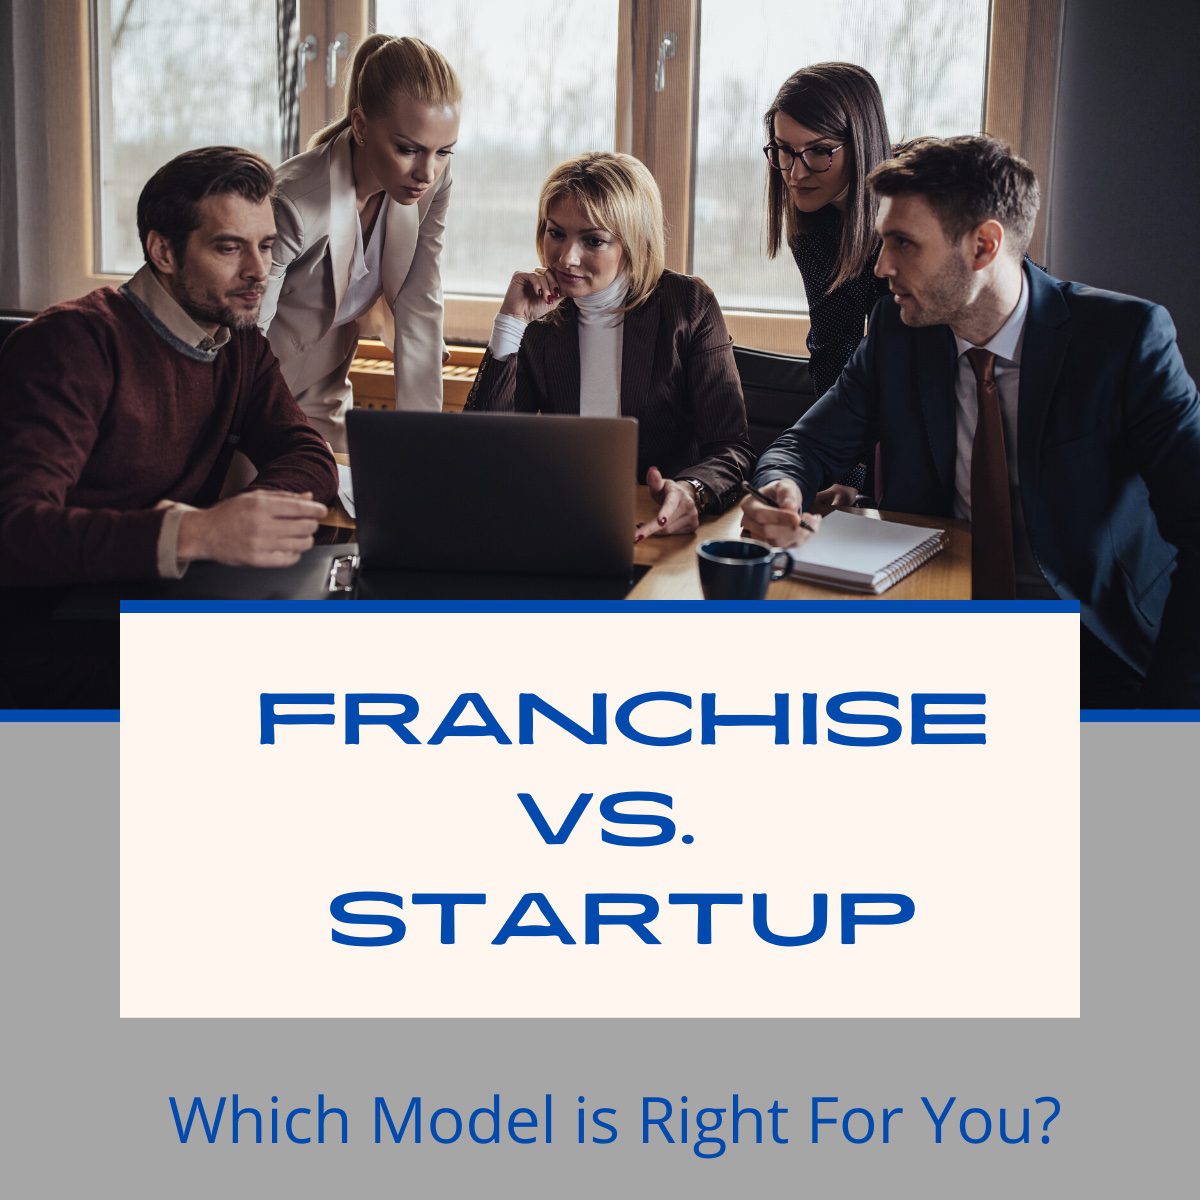 Franchise vs. Startup - A team of professionals around a laptop